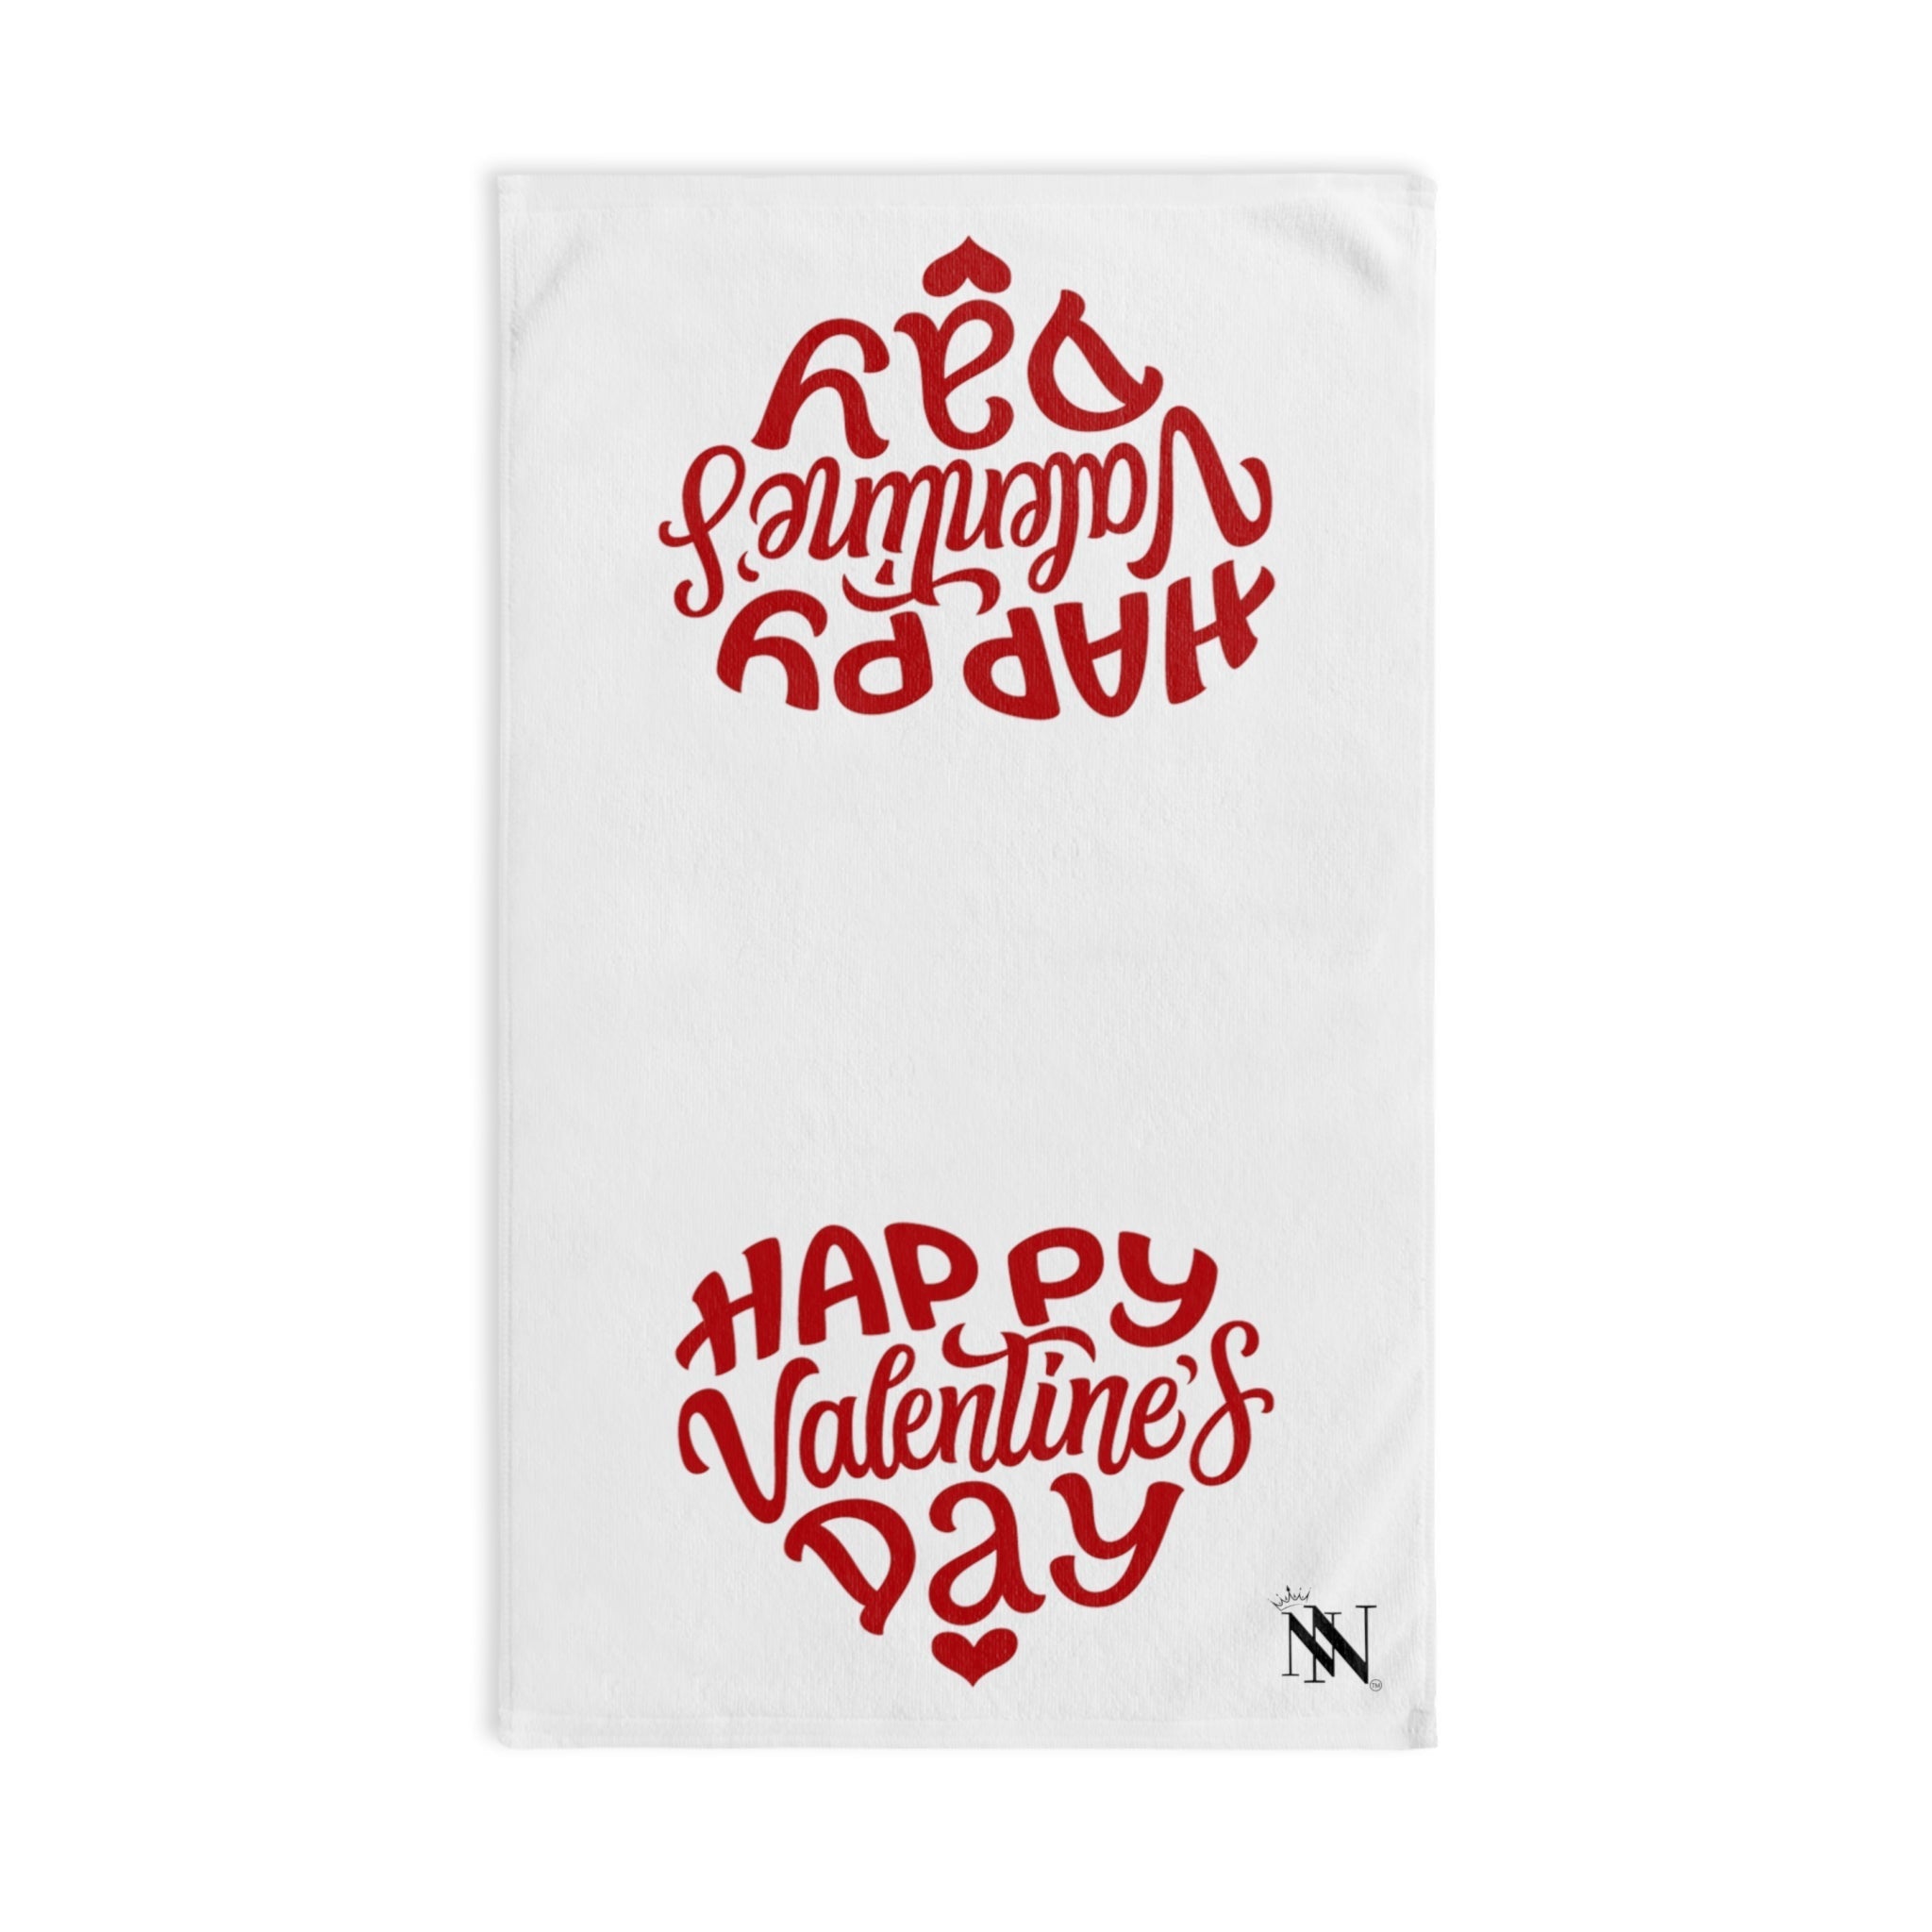 Vday Shareable | Gifts for Boyfriend, Funny Towel Romantic Gift for Wedding Couple Fiance First Year Anniversary Valentines, Party Gag Gifts, Joke Humor Cloth for Husband Men BF NECTAR NAPKINS